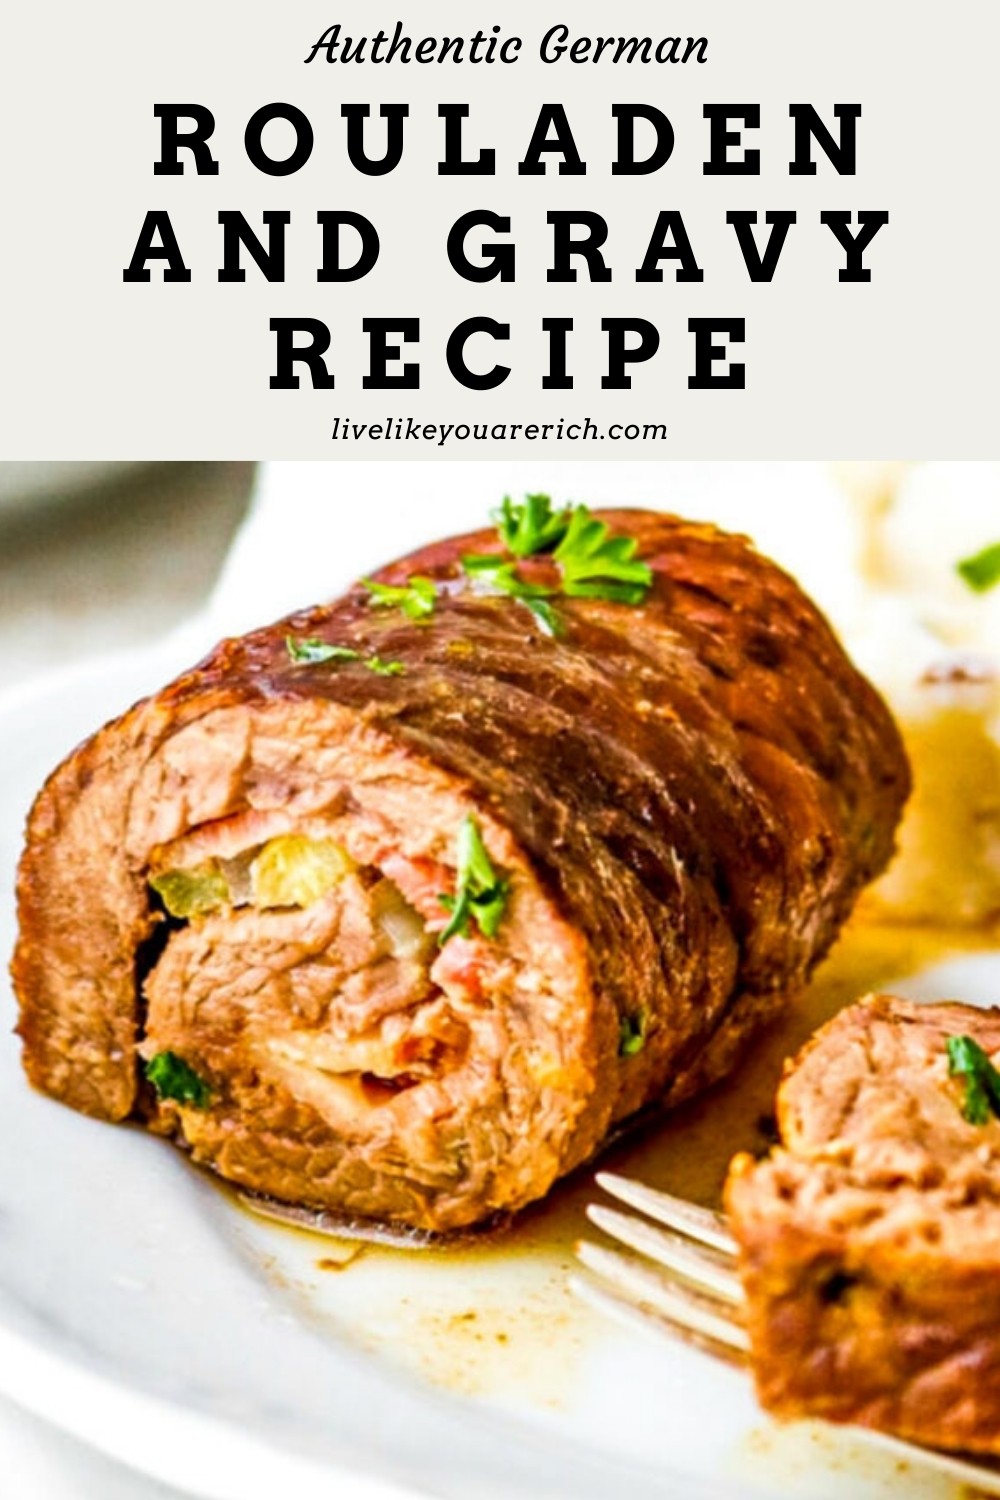 An authentic German beef roll filled with delicious flavors and simmered in a skillet. Once cooked, the simmering drippings are easily turned into a delicious gravy to serve on top of the Rouladen.